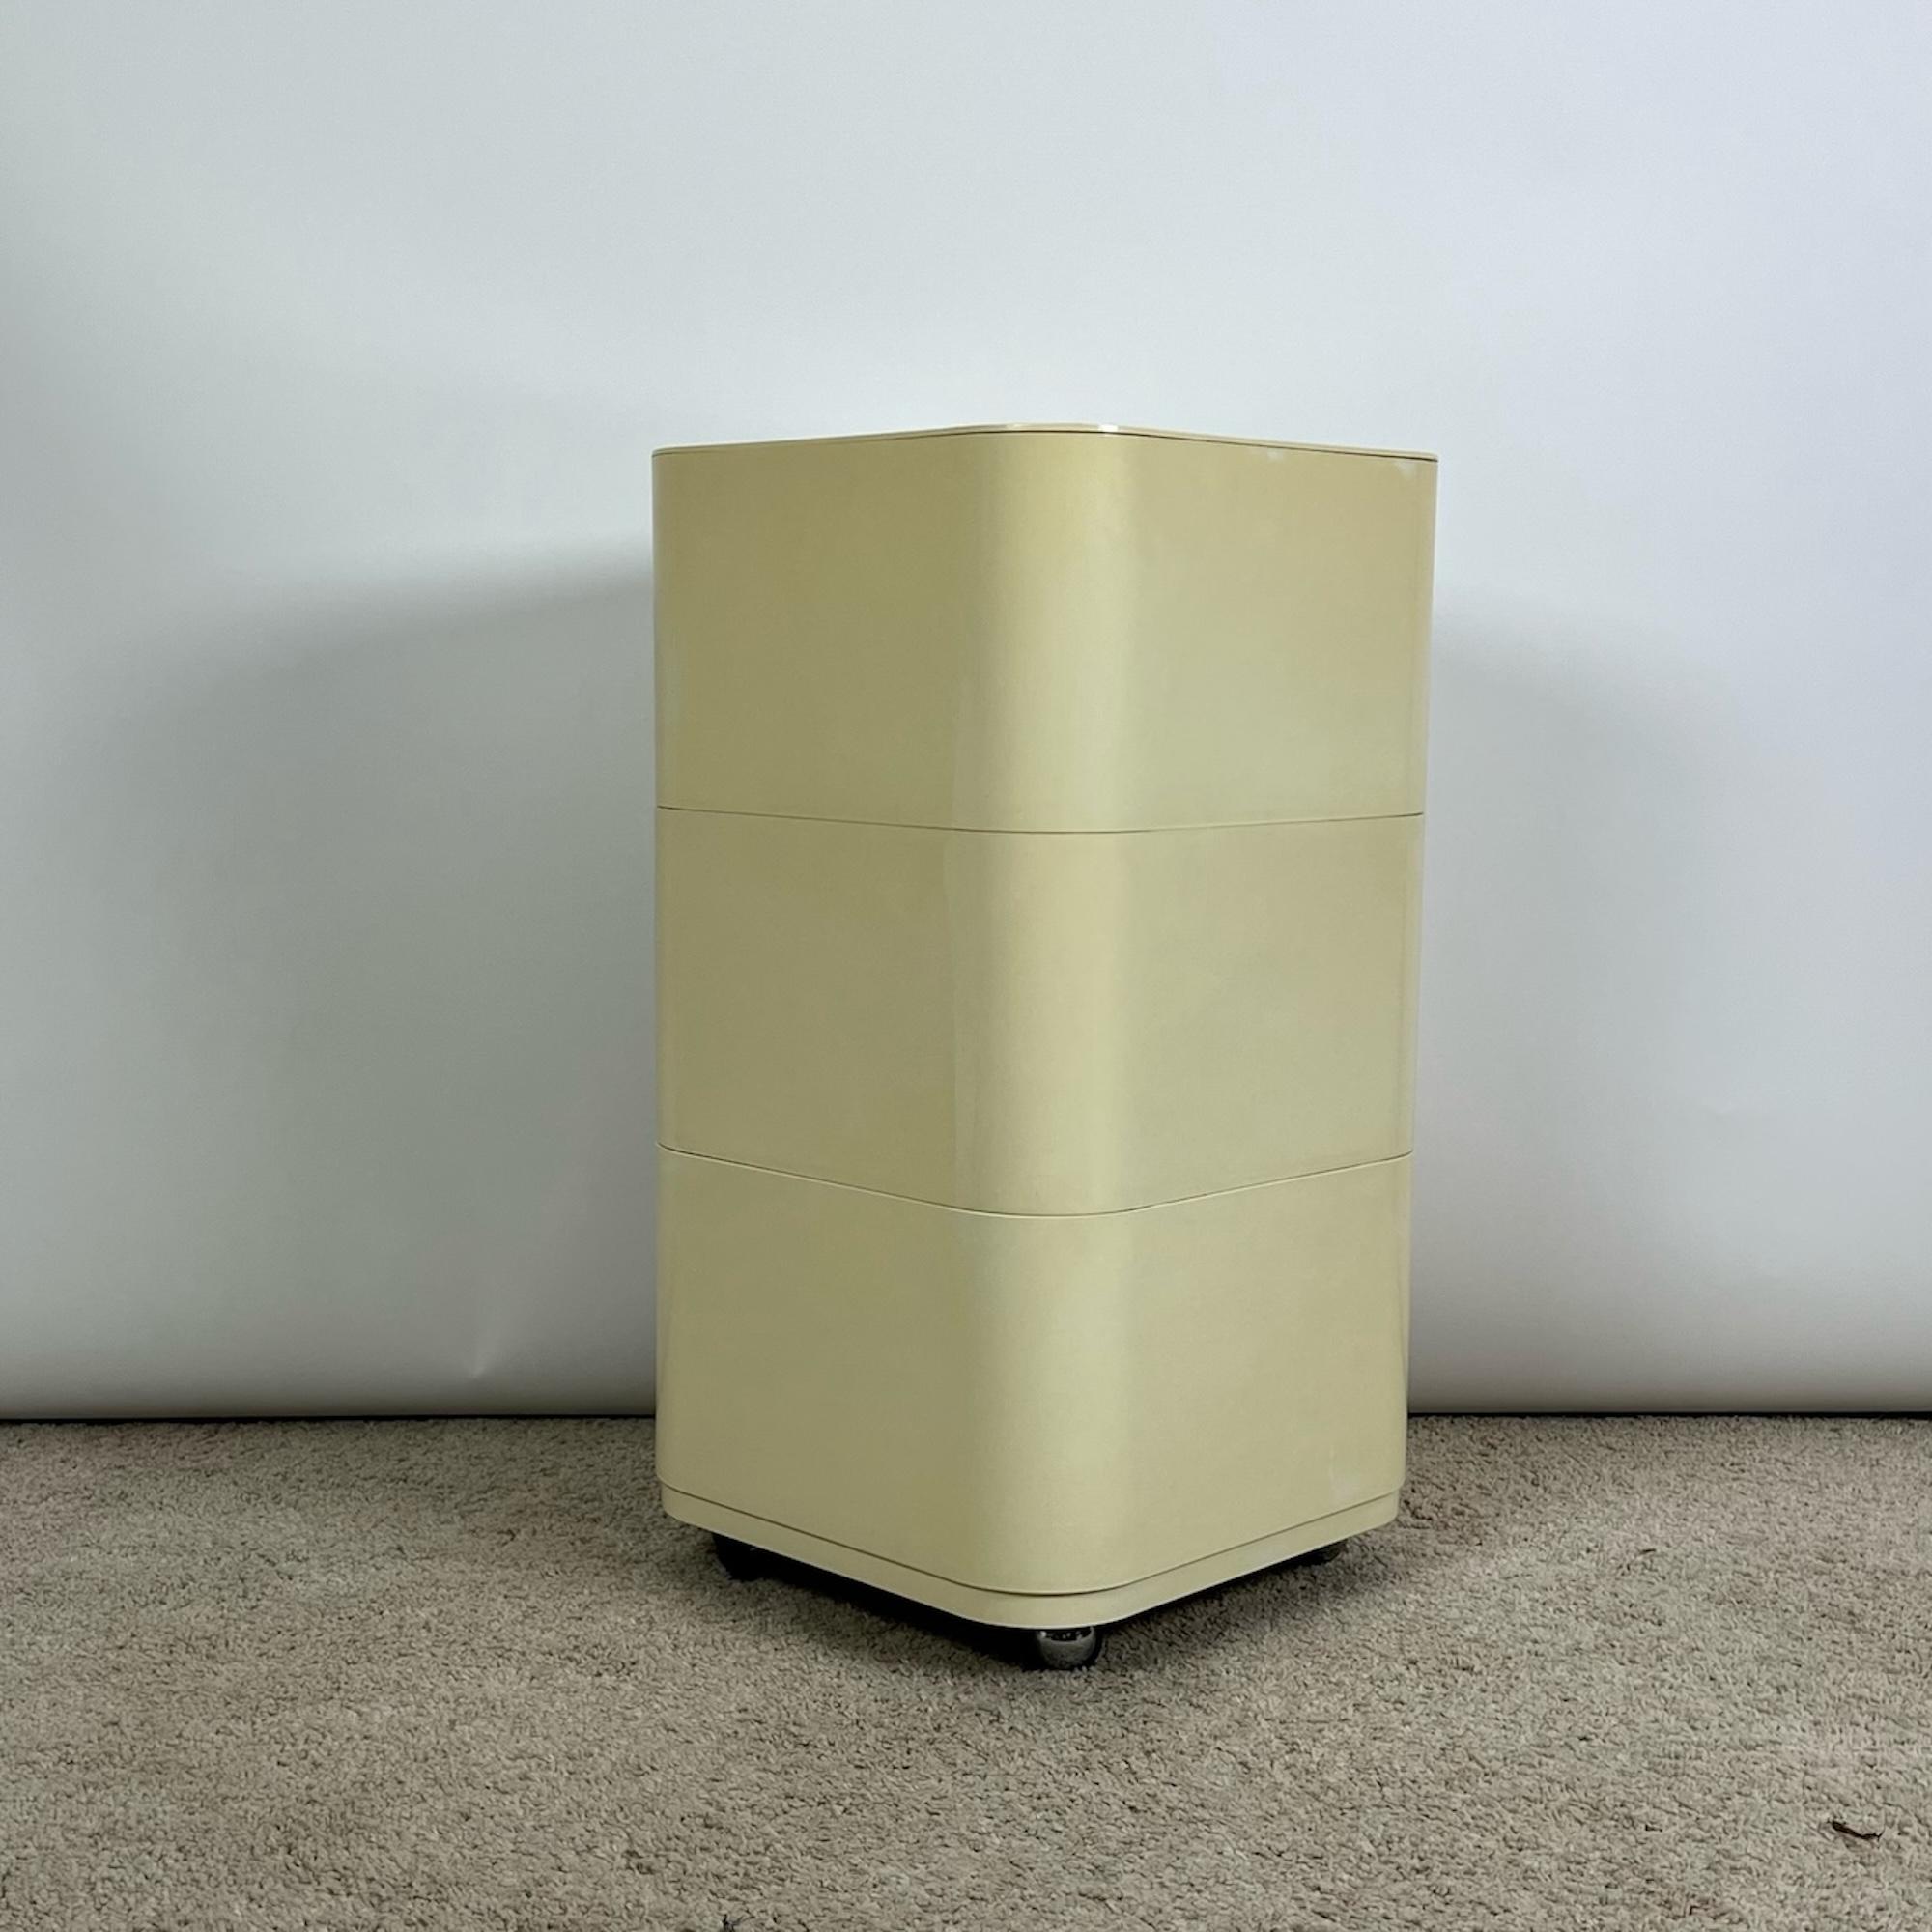 Plastic Componibili 4970 Cabinet Modules with Wheels by Anna Castelli for Kartell, 1960s For Sale